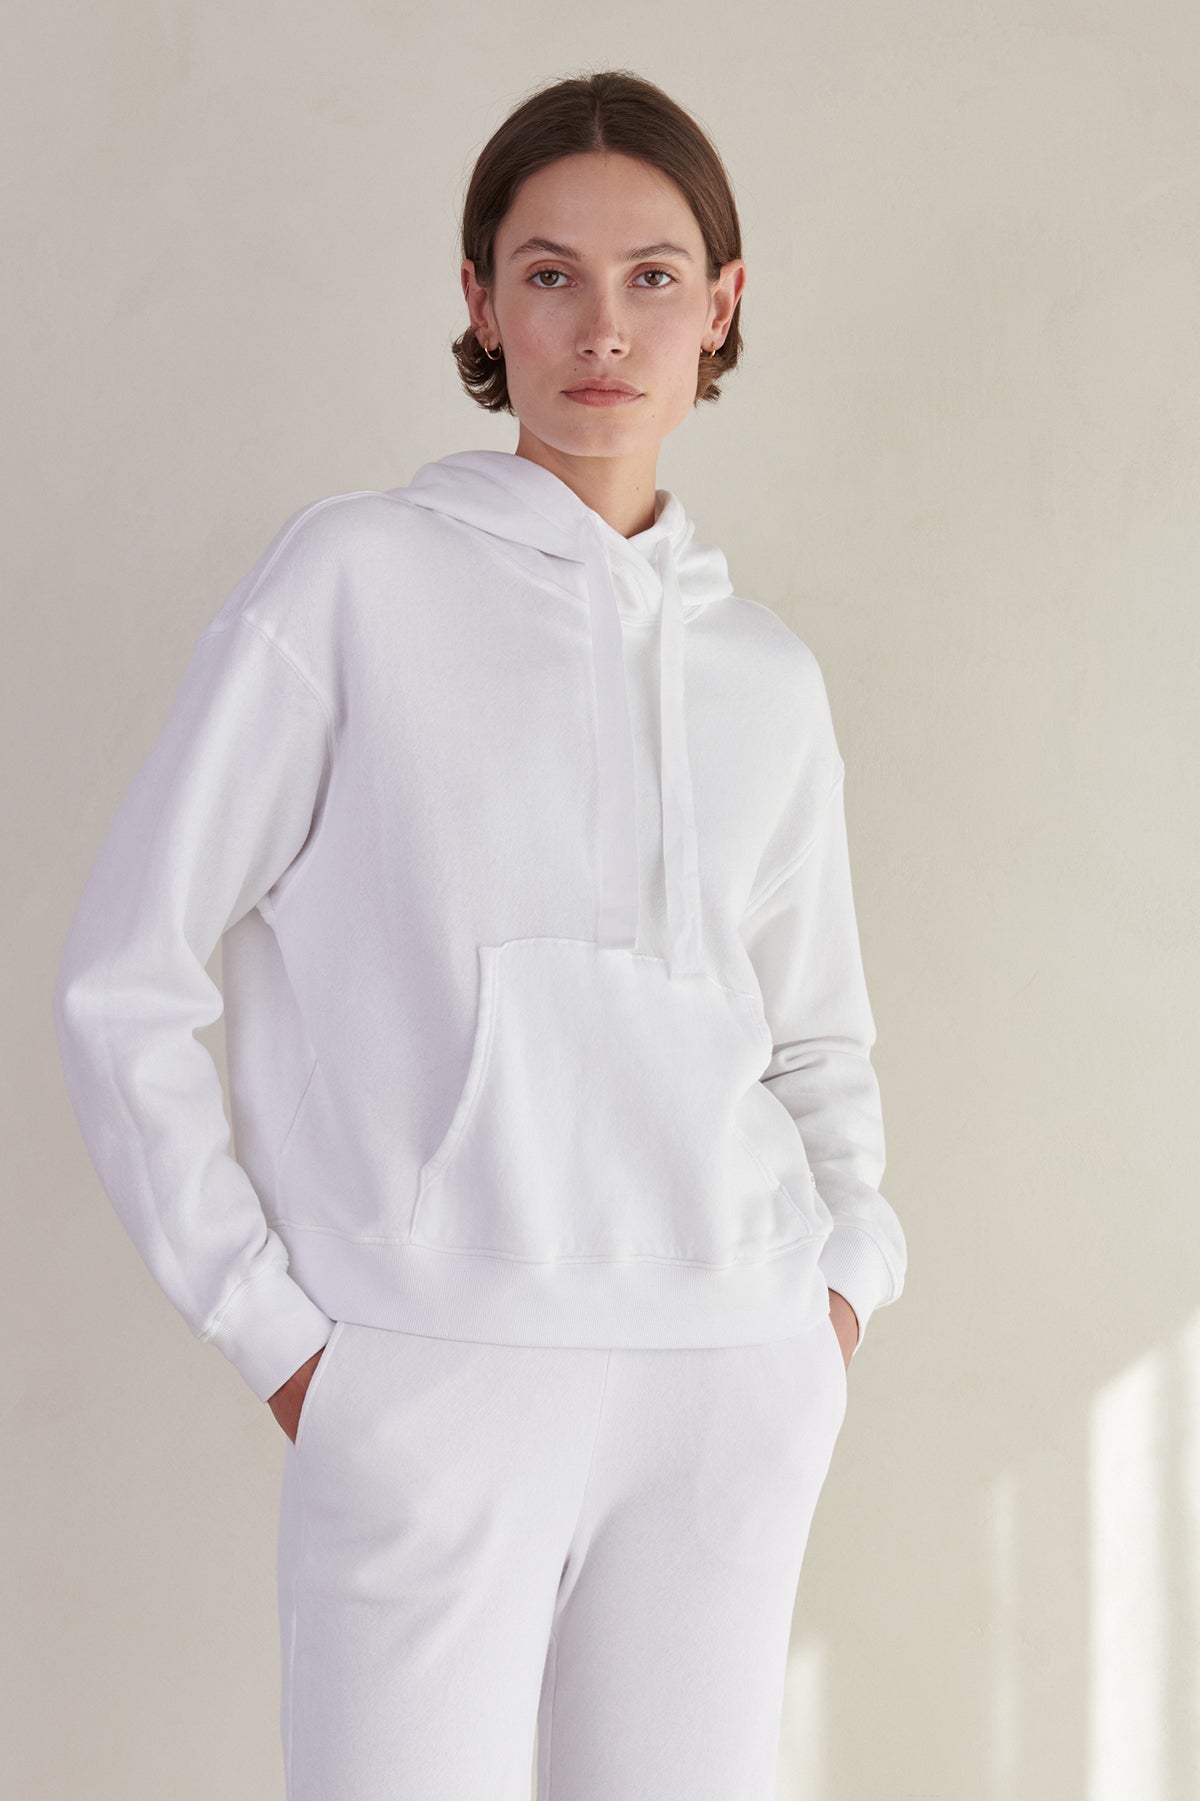 Ojai Hoodie in white front-25520631054529